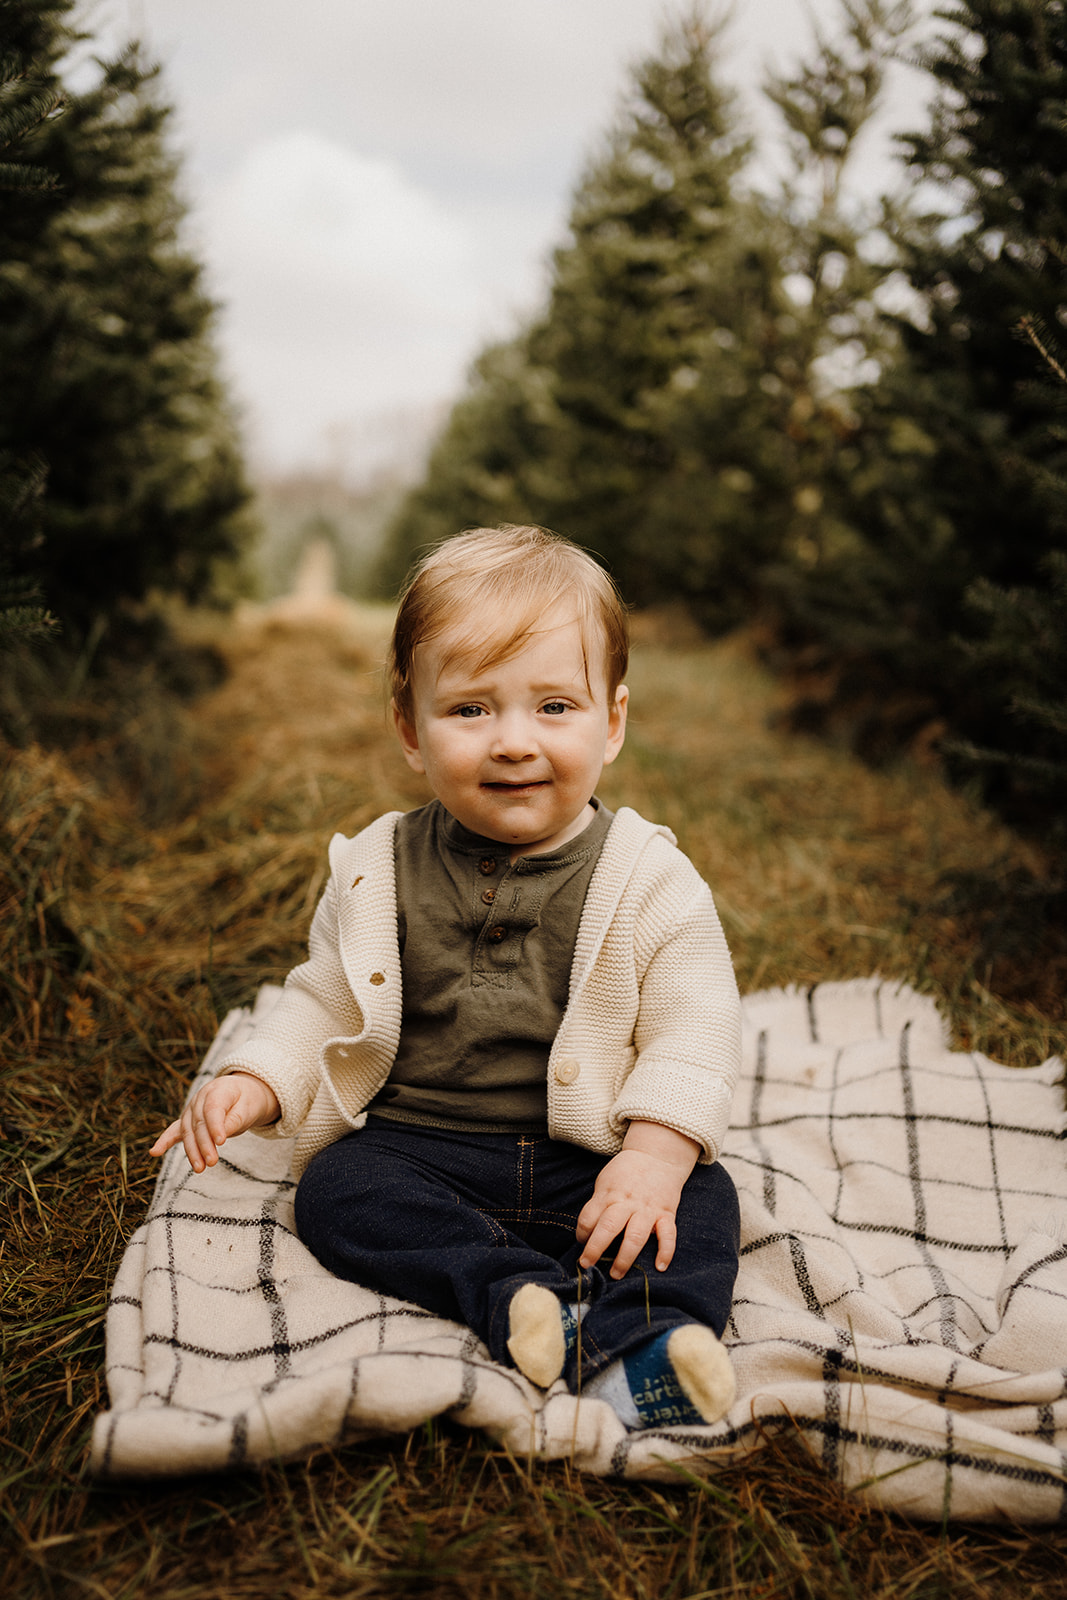 A little boy sitting on a blanket outside between Christmas Trees.